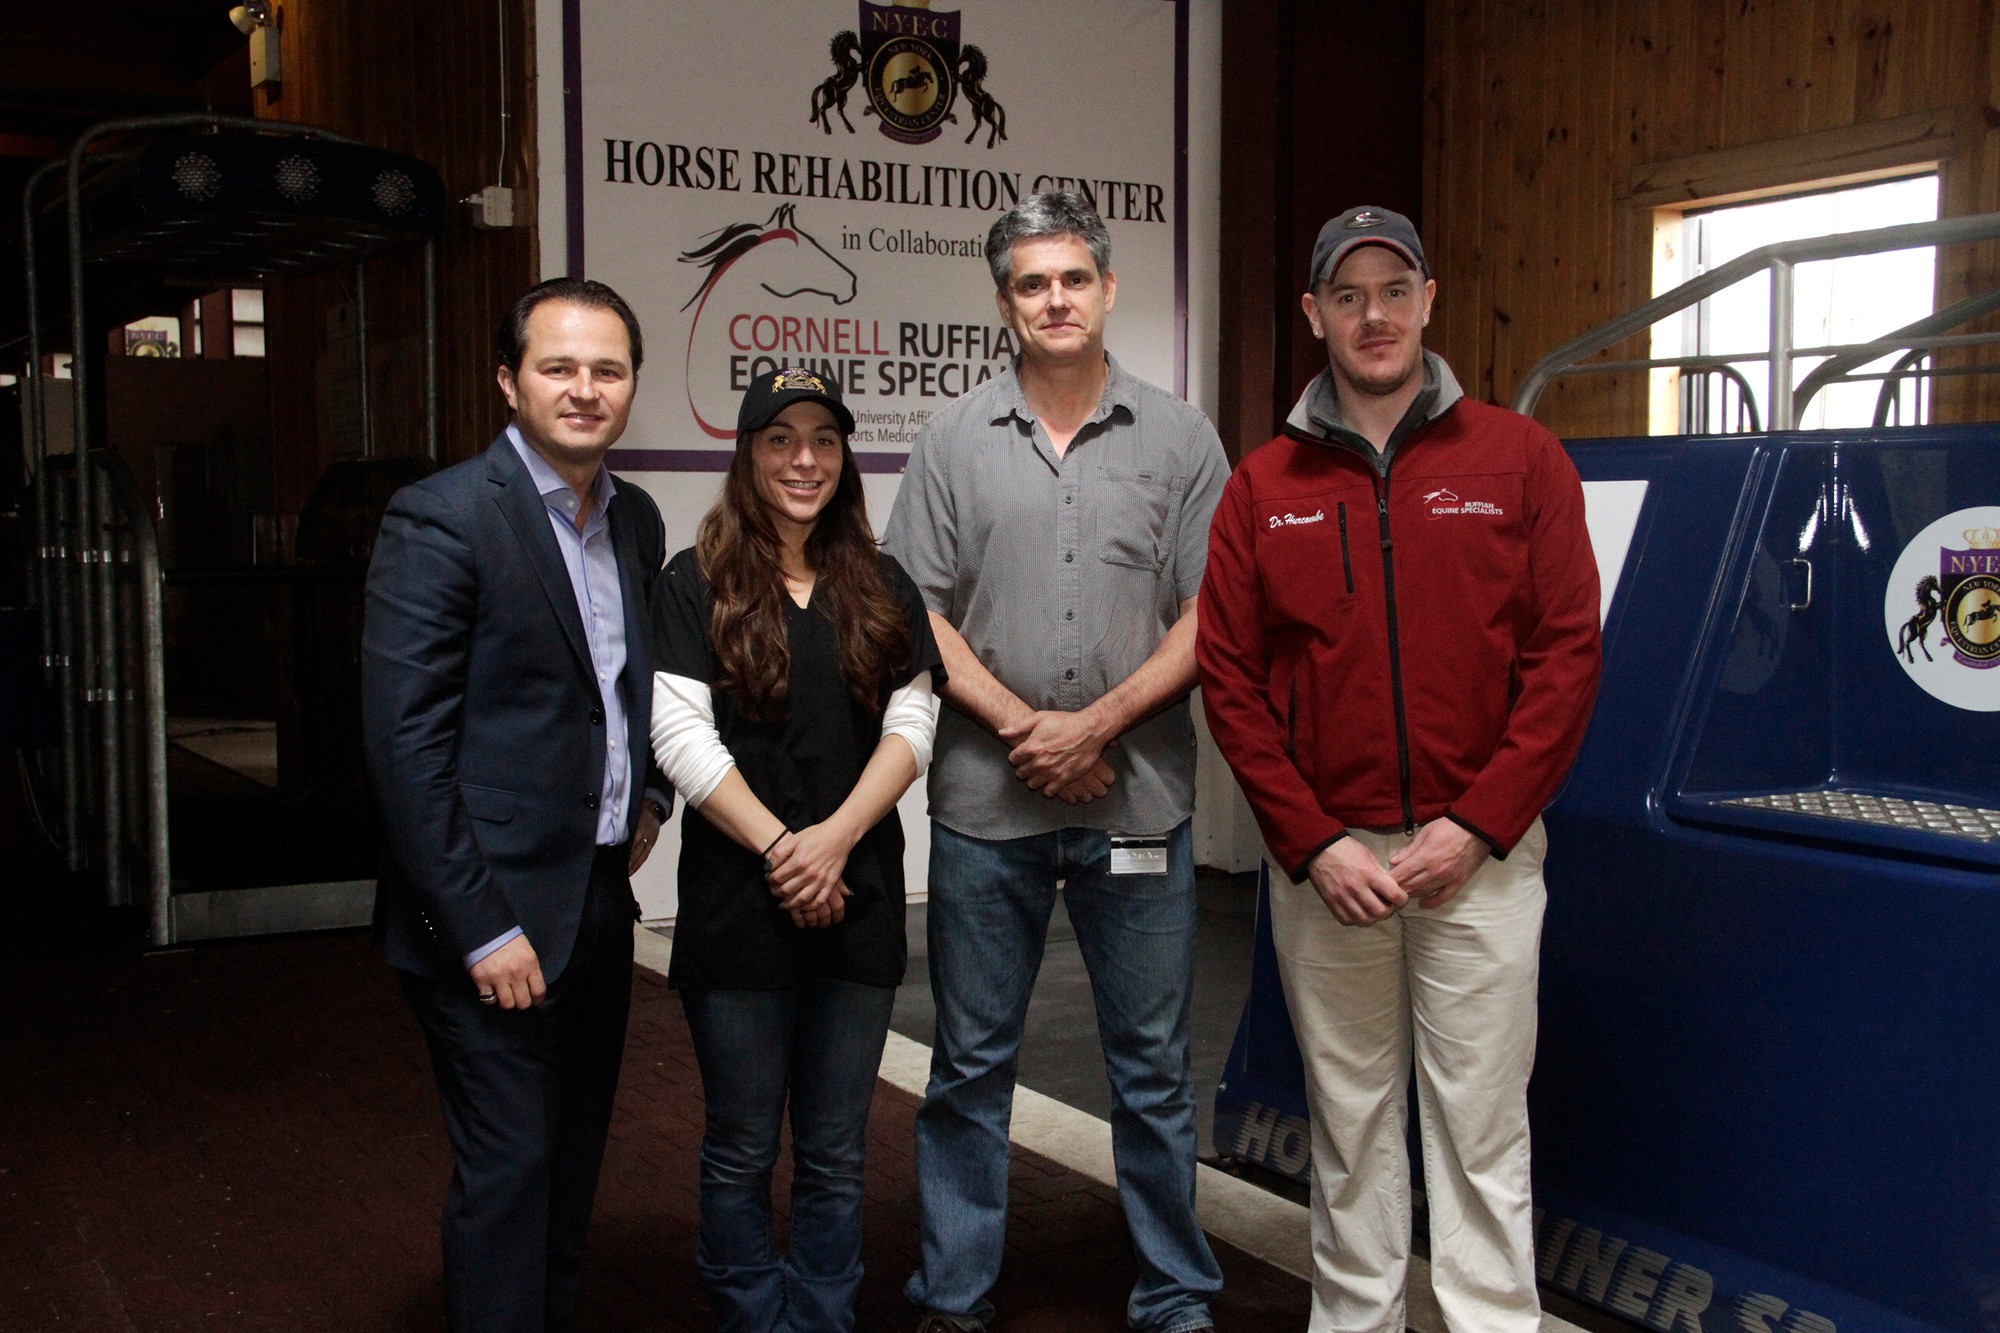 Alex Jacobson, who owns both the New York Equestrian Center and the rehab center, left, with the center’s general manager, Denise Smith, and Drs. Sam Hurcombe and Tom Yarbrough of Cornell Equine Ruffian Associates.